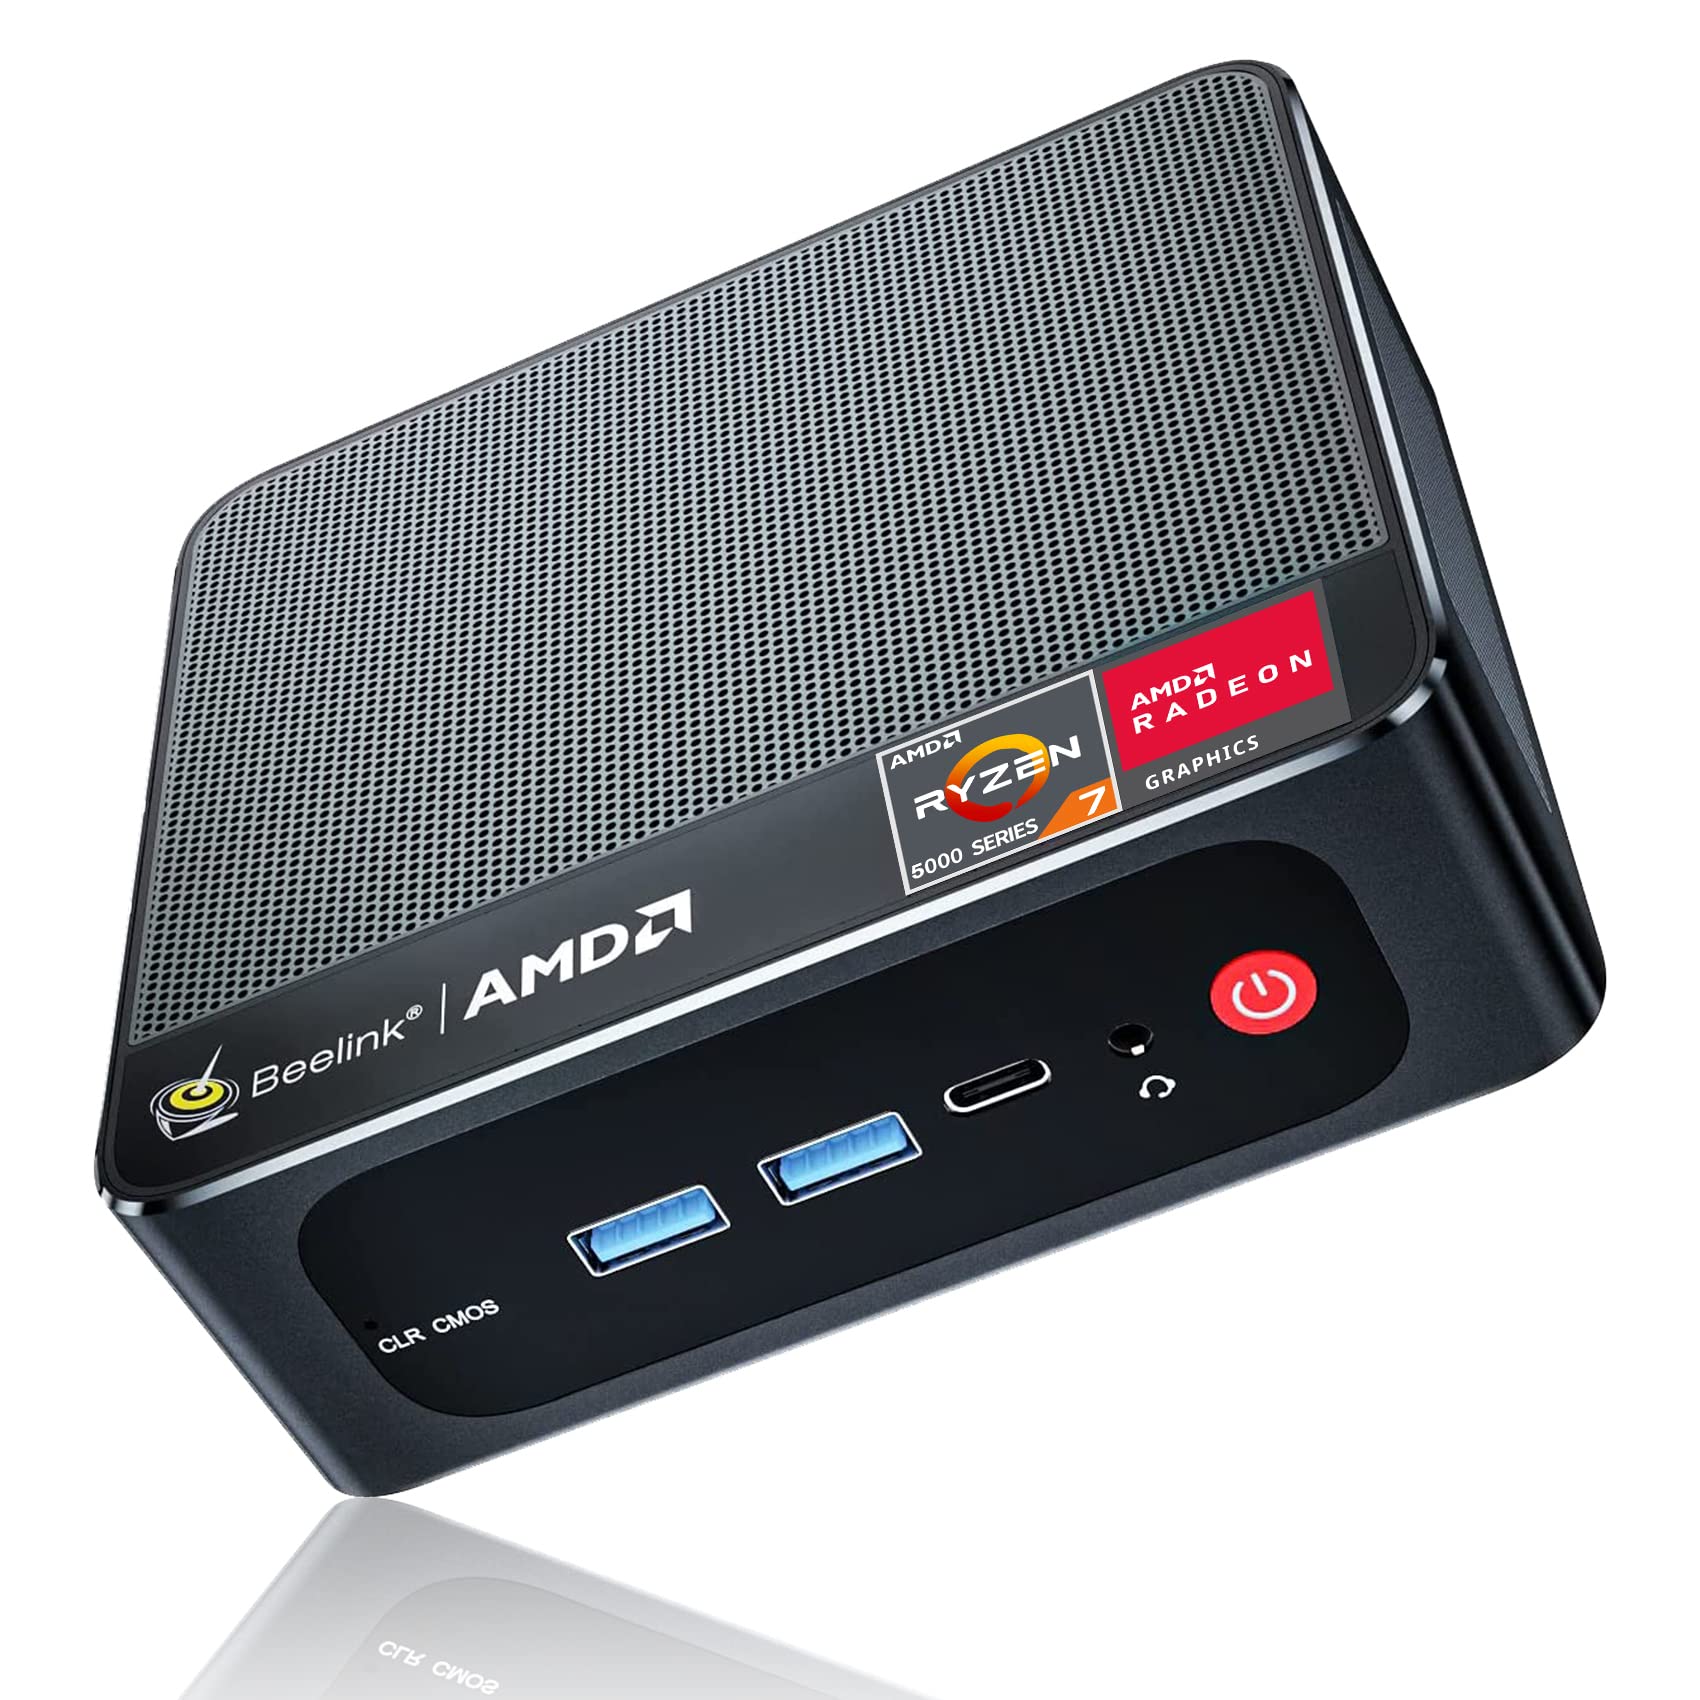 Beelink Mini PC AMD Ryzen 7 5800H 8Cores/16Threads(Up to 4.4GHz) 16G DDR4 3200Mhz+500G M.2 NVME Pcle SSD,Mini Computers Support Triple Display 4K@60Hz/WiFi 6/BT5.2/HDMI/DP/USB-C,Gaming/Office/Home